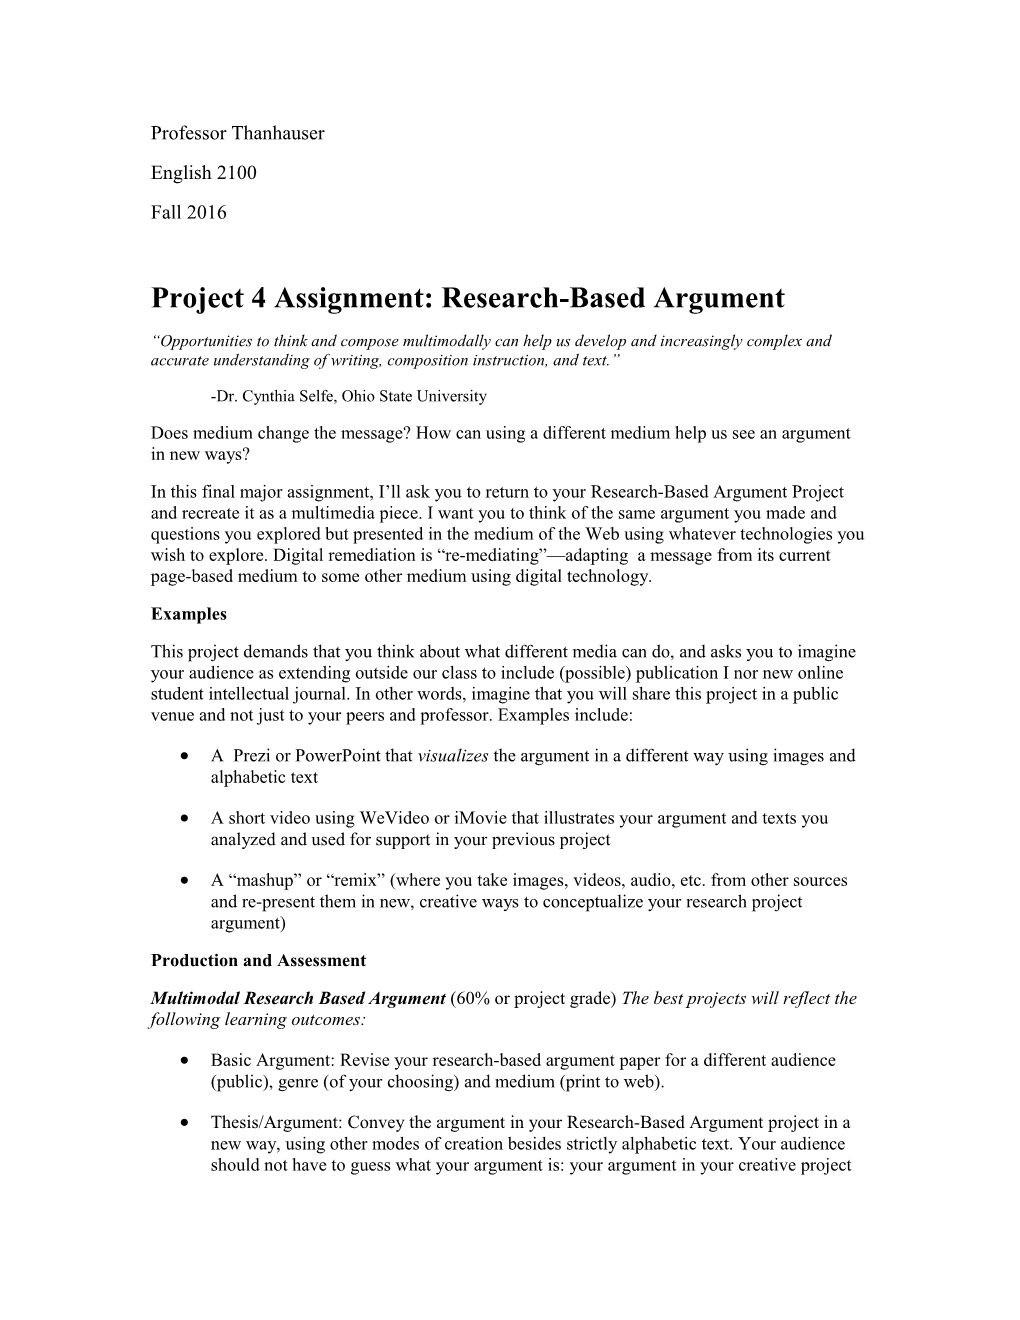 Project 4 Assignment: Research-Based Argument